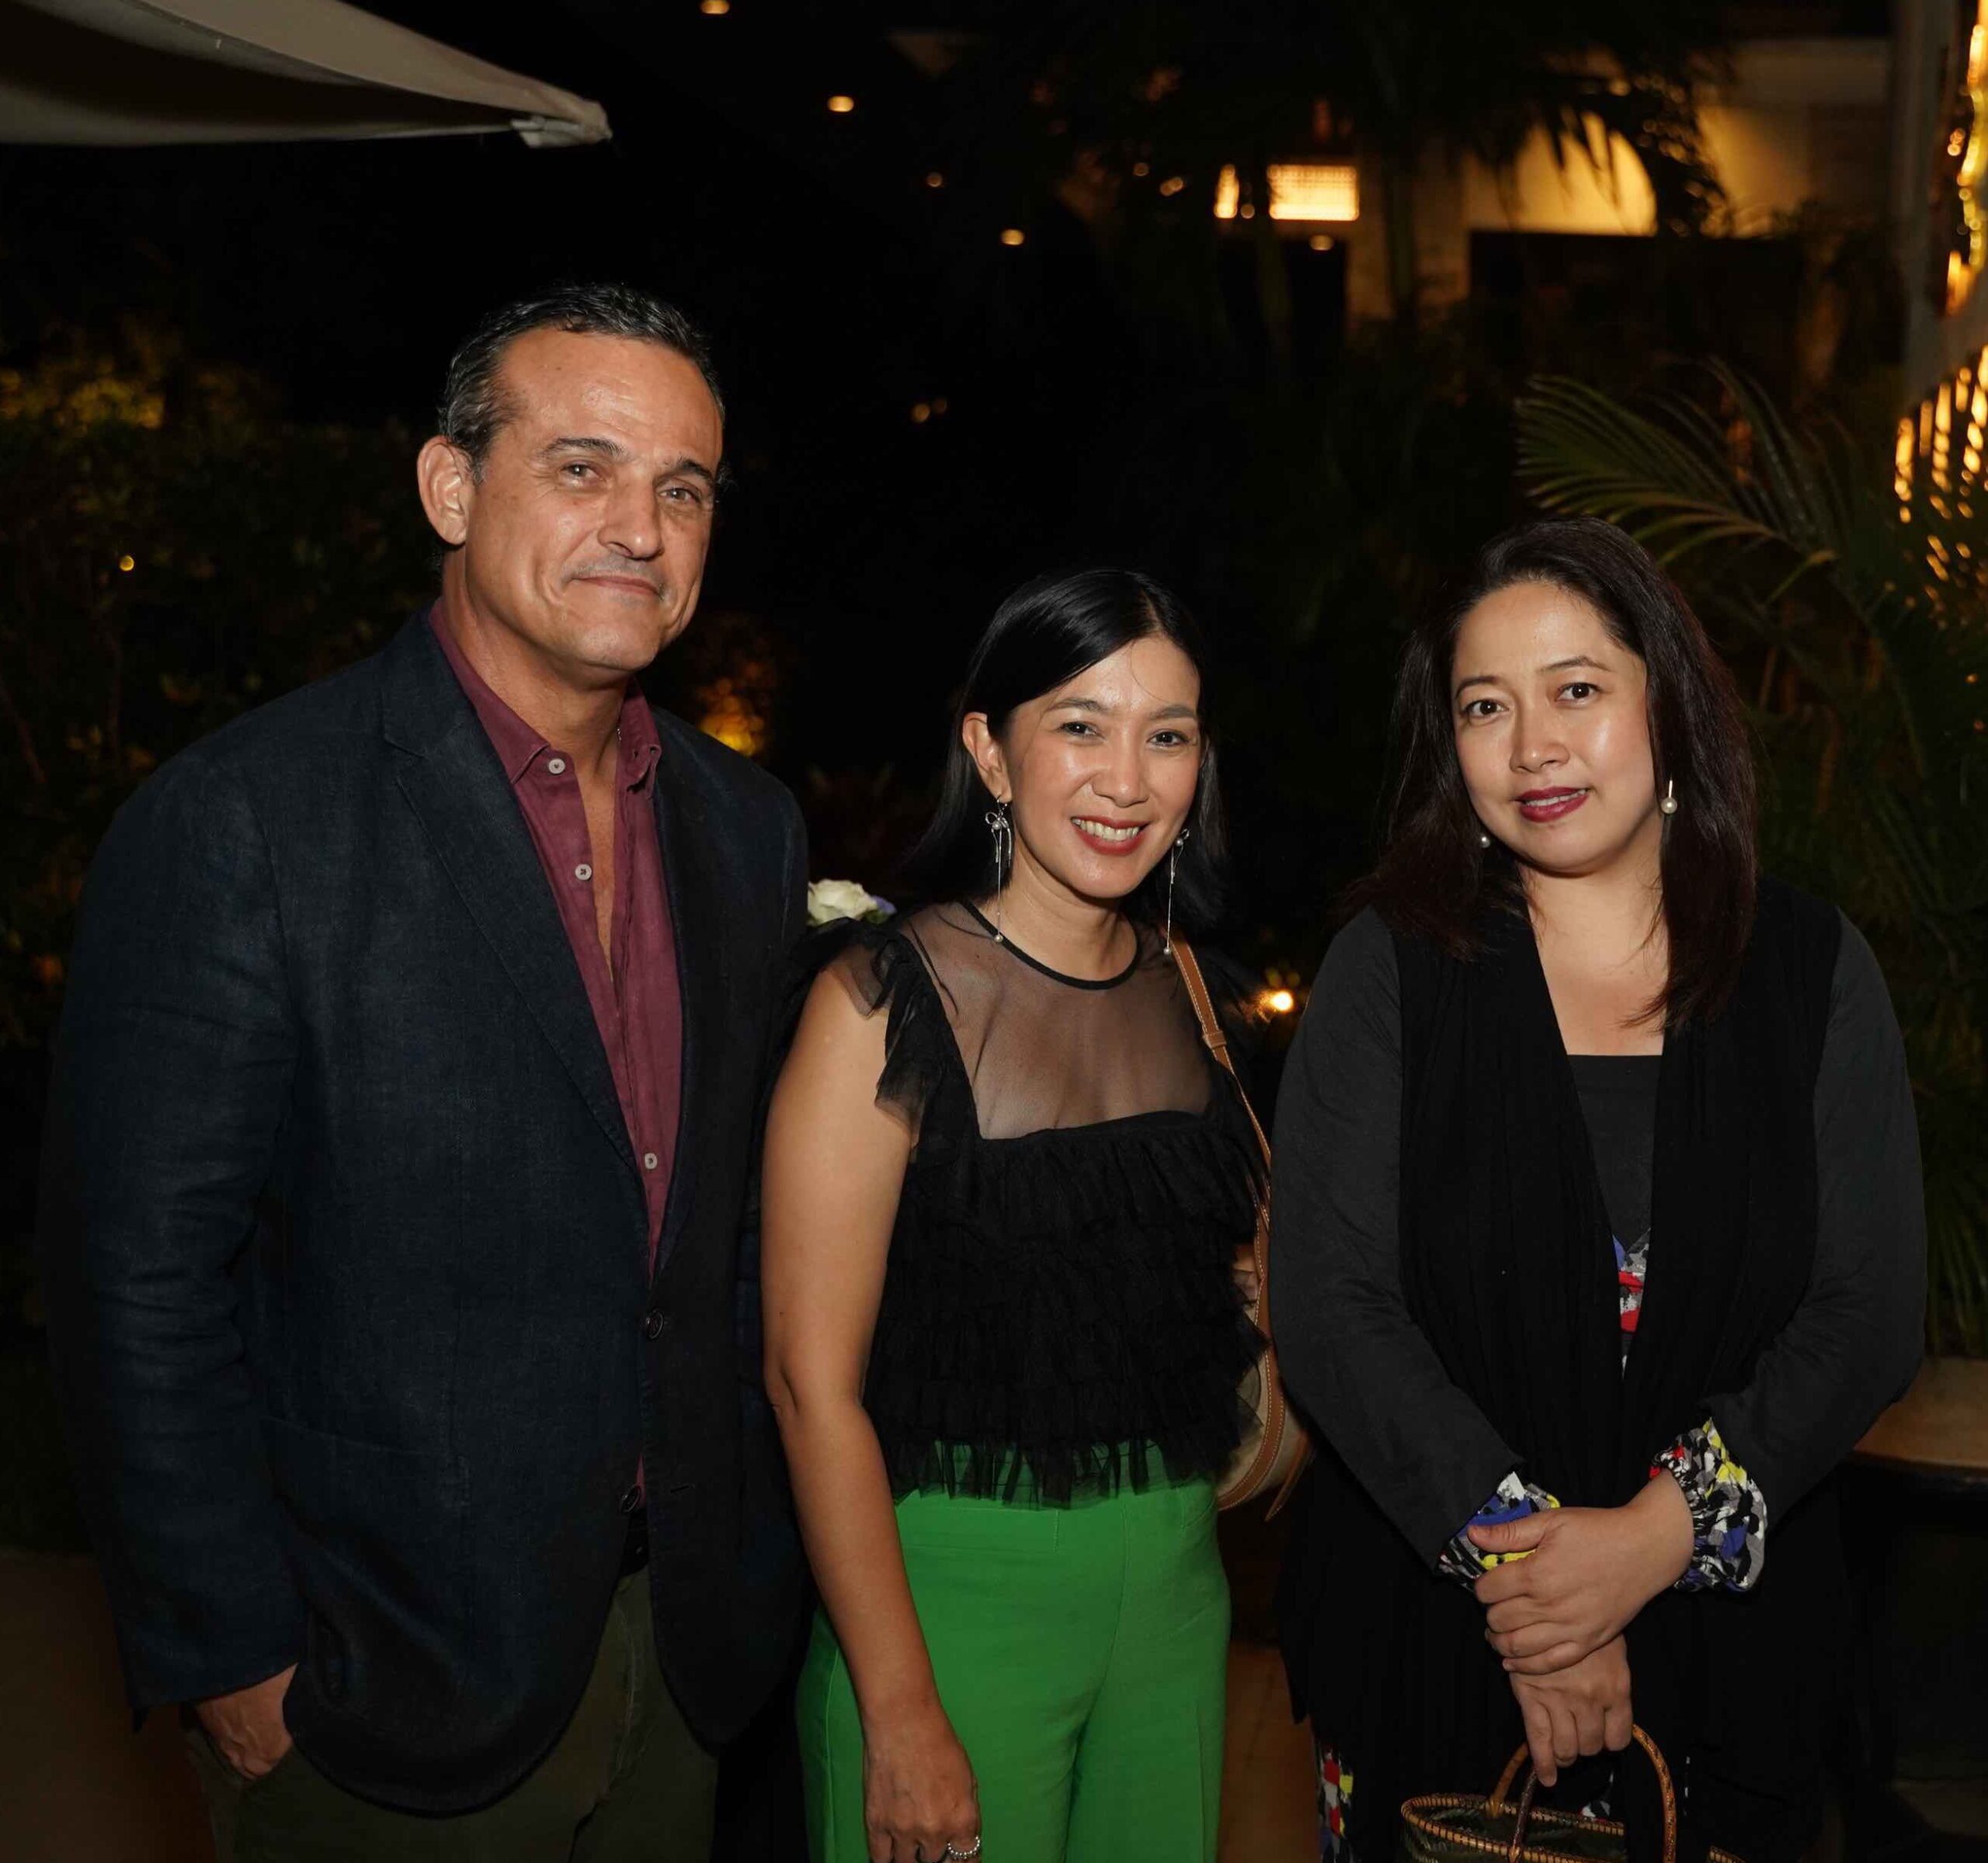 Anya Hospitality Group President and CEO Santi Elizalde, Anya Hospitality Group Corporate Marketing Director Mylene Mendoza, Philippine Hotel Owners Association Operations Manager Minoll Alano